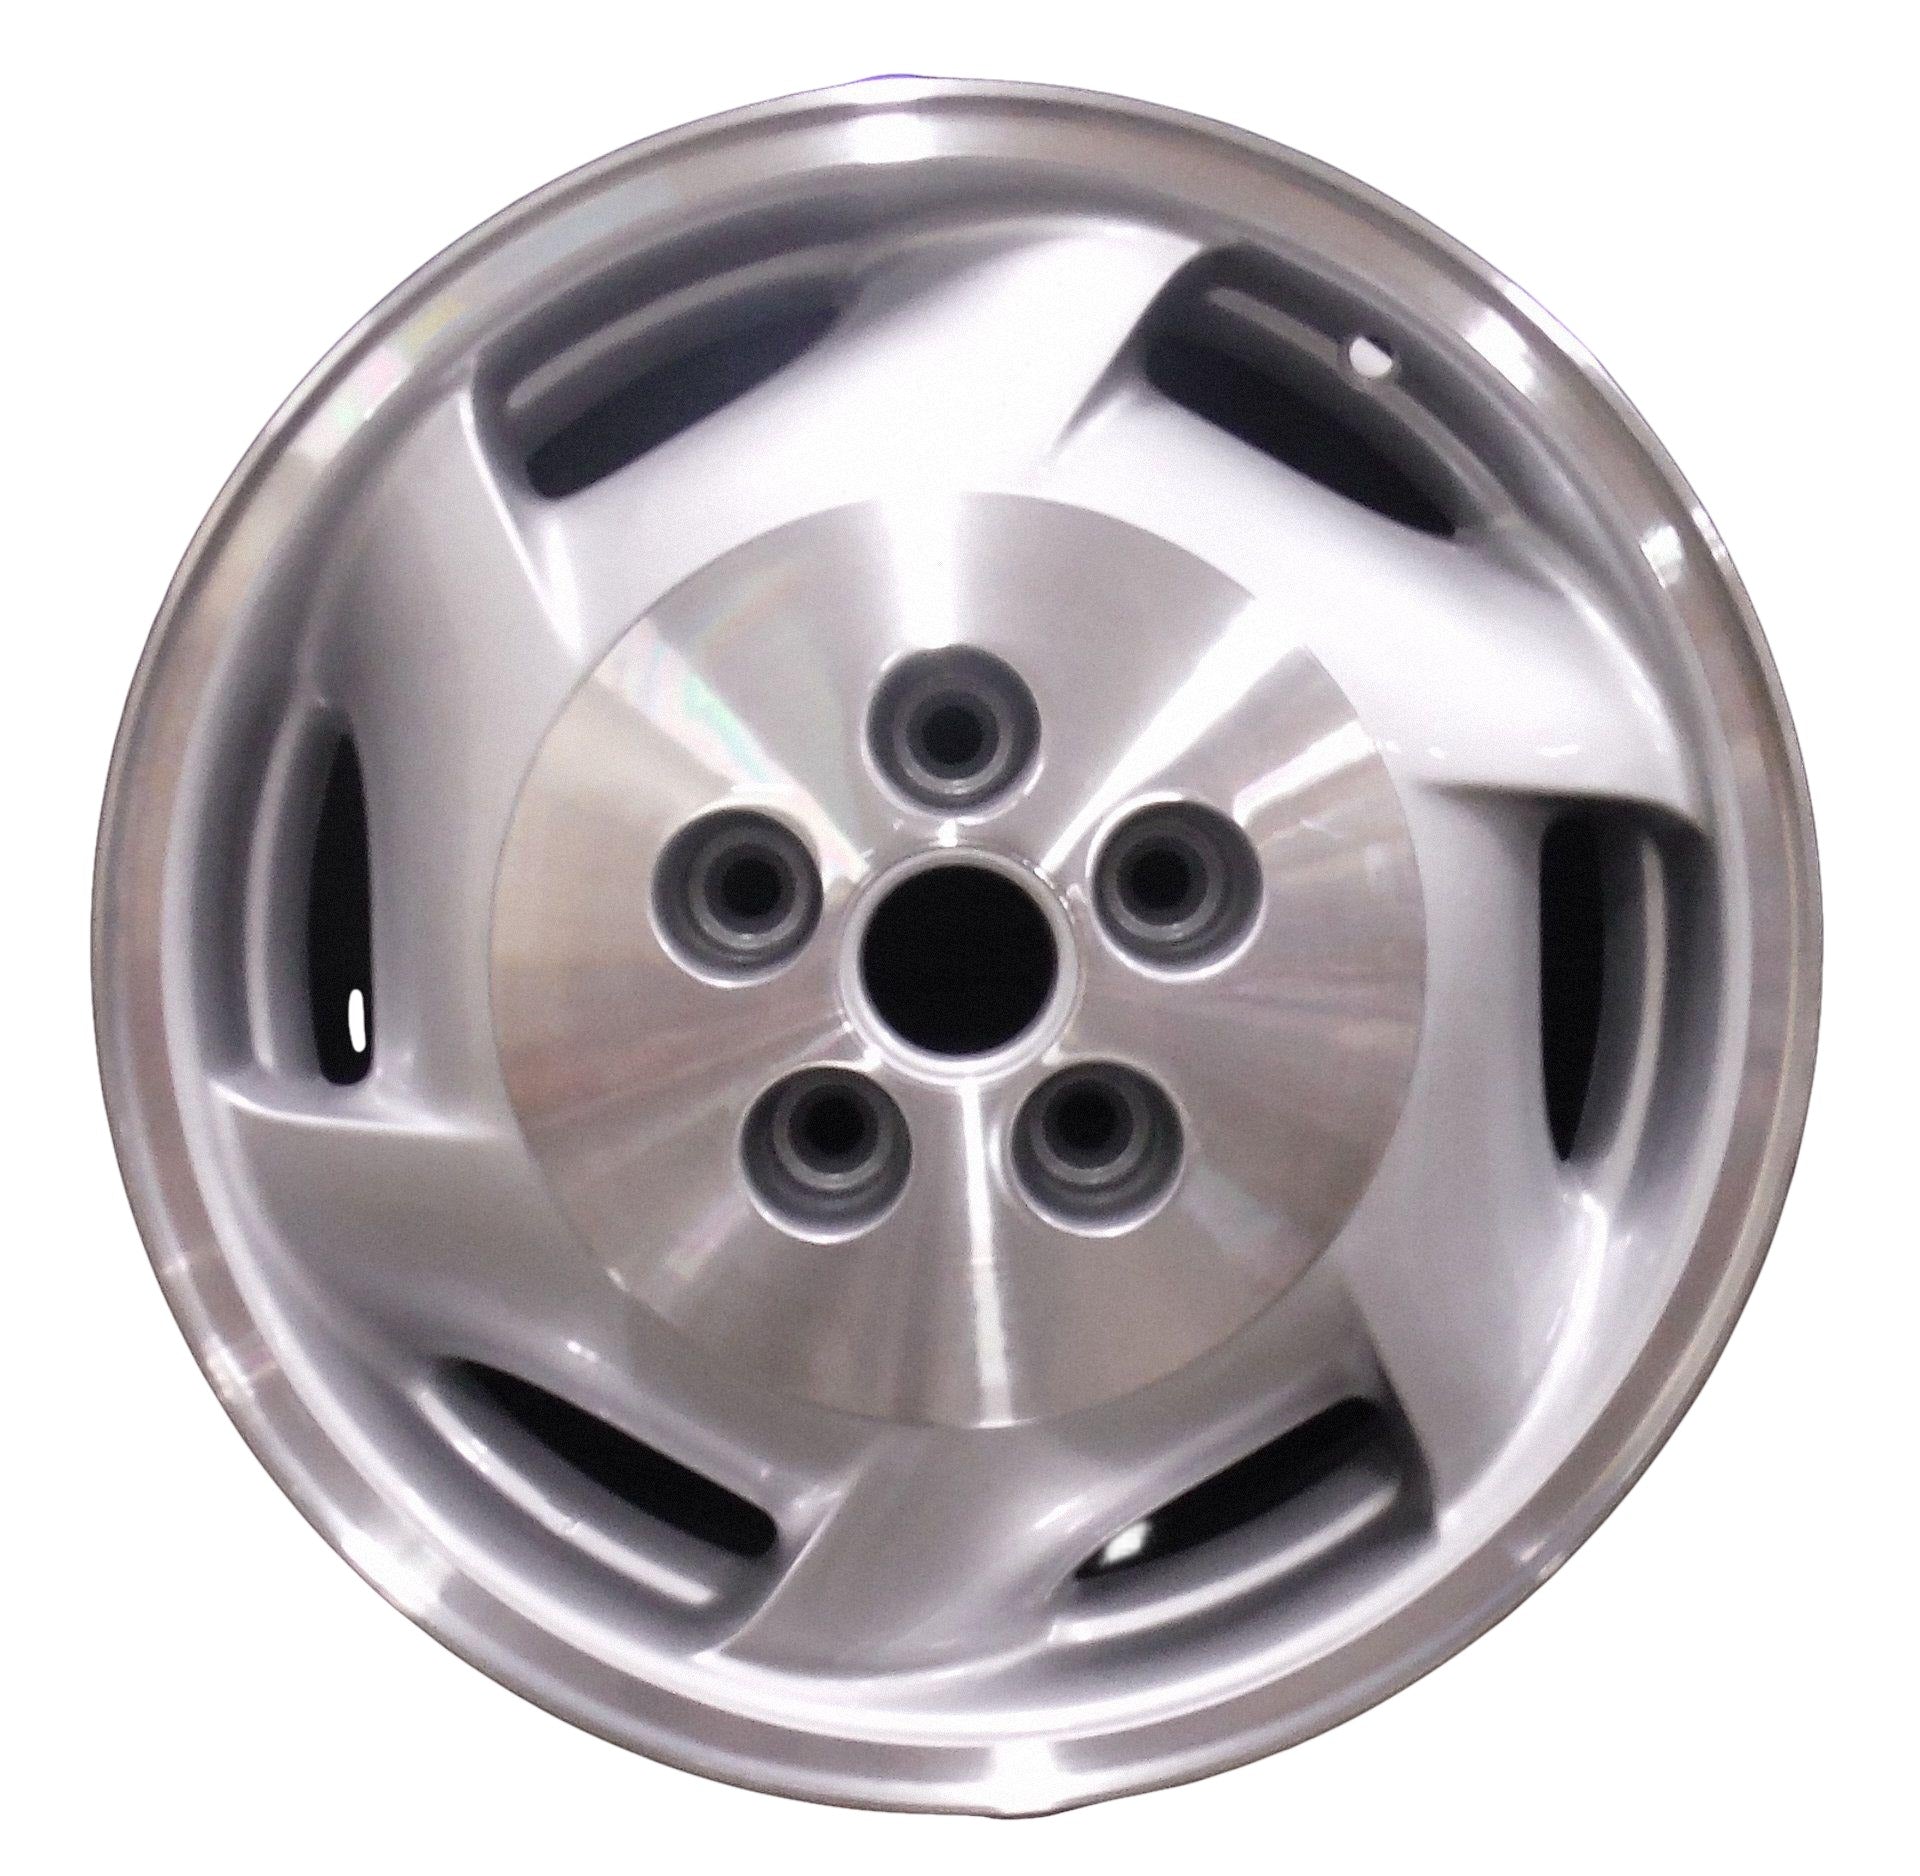 Chevrolet Monte Carlo  1995, 1996, 1997, 1998, 1999, 2000 Factory OEM Car Wheel Size 16x6.5 Alloy WAO.5046.PS03.MA